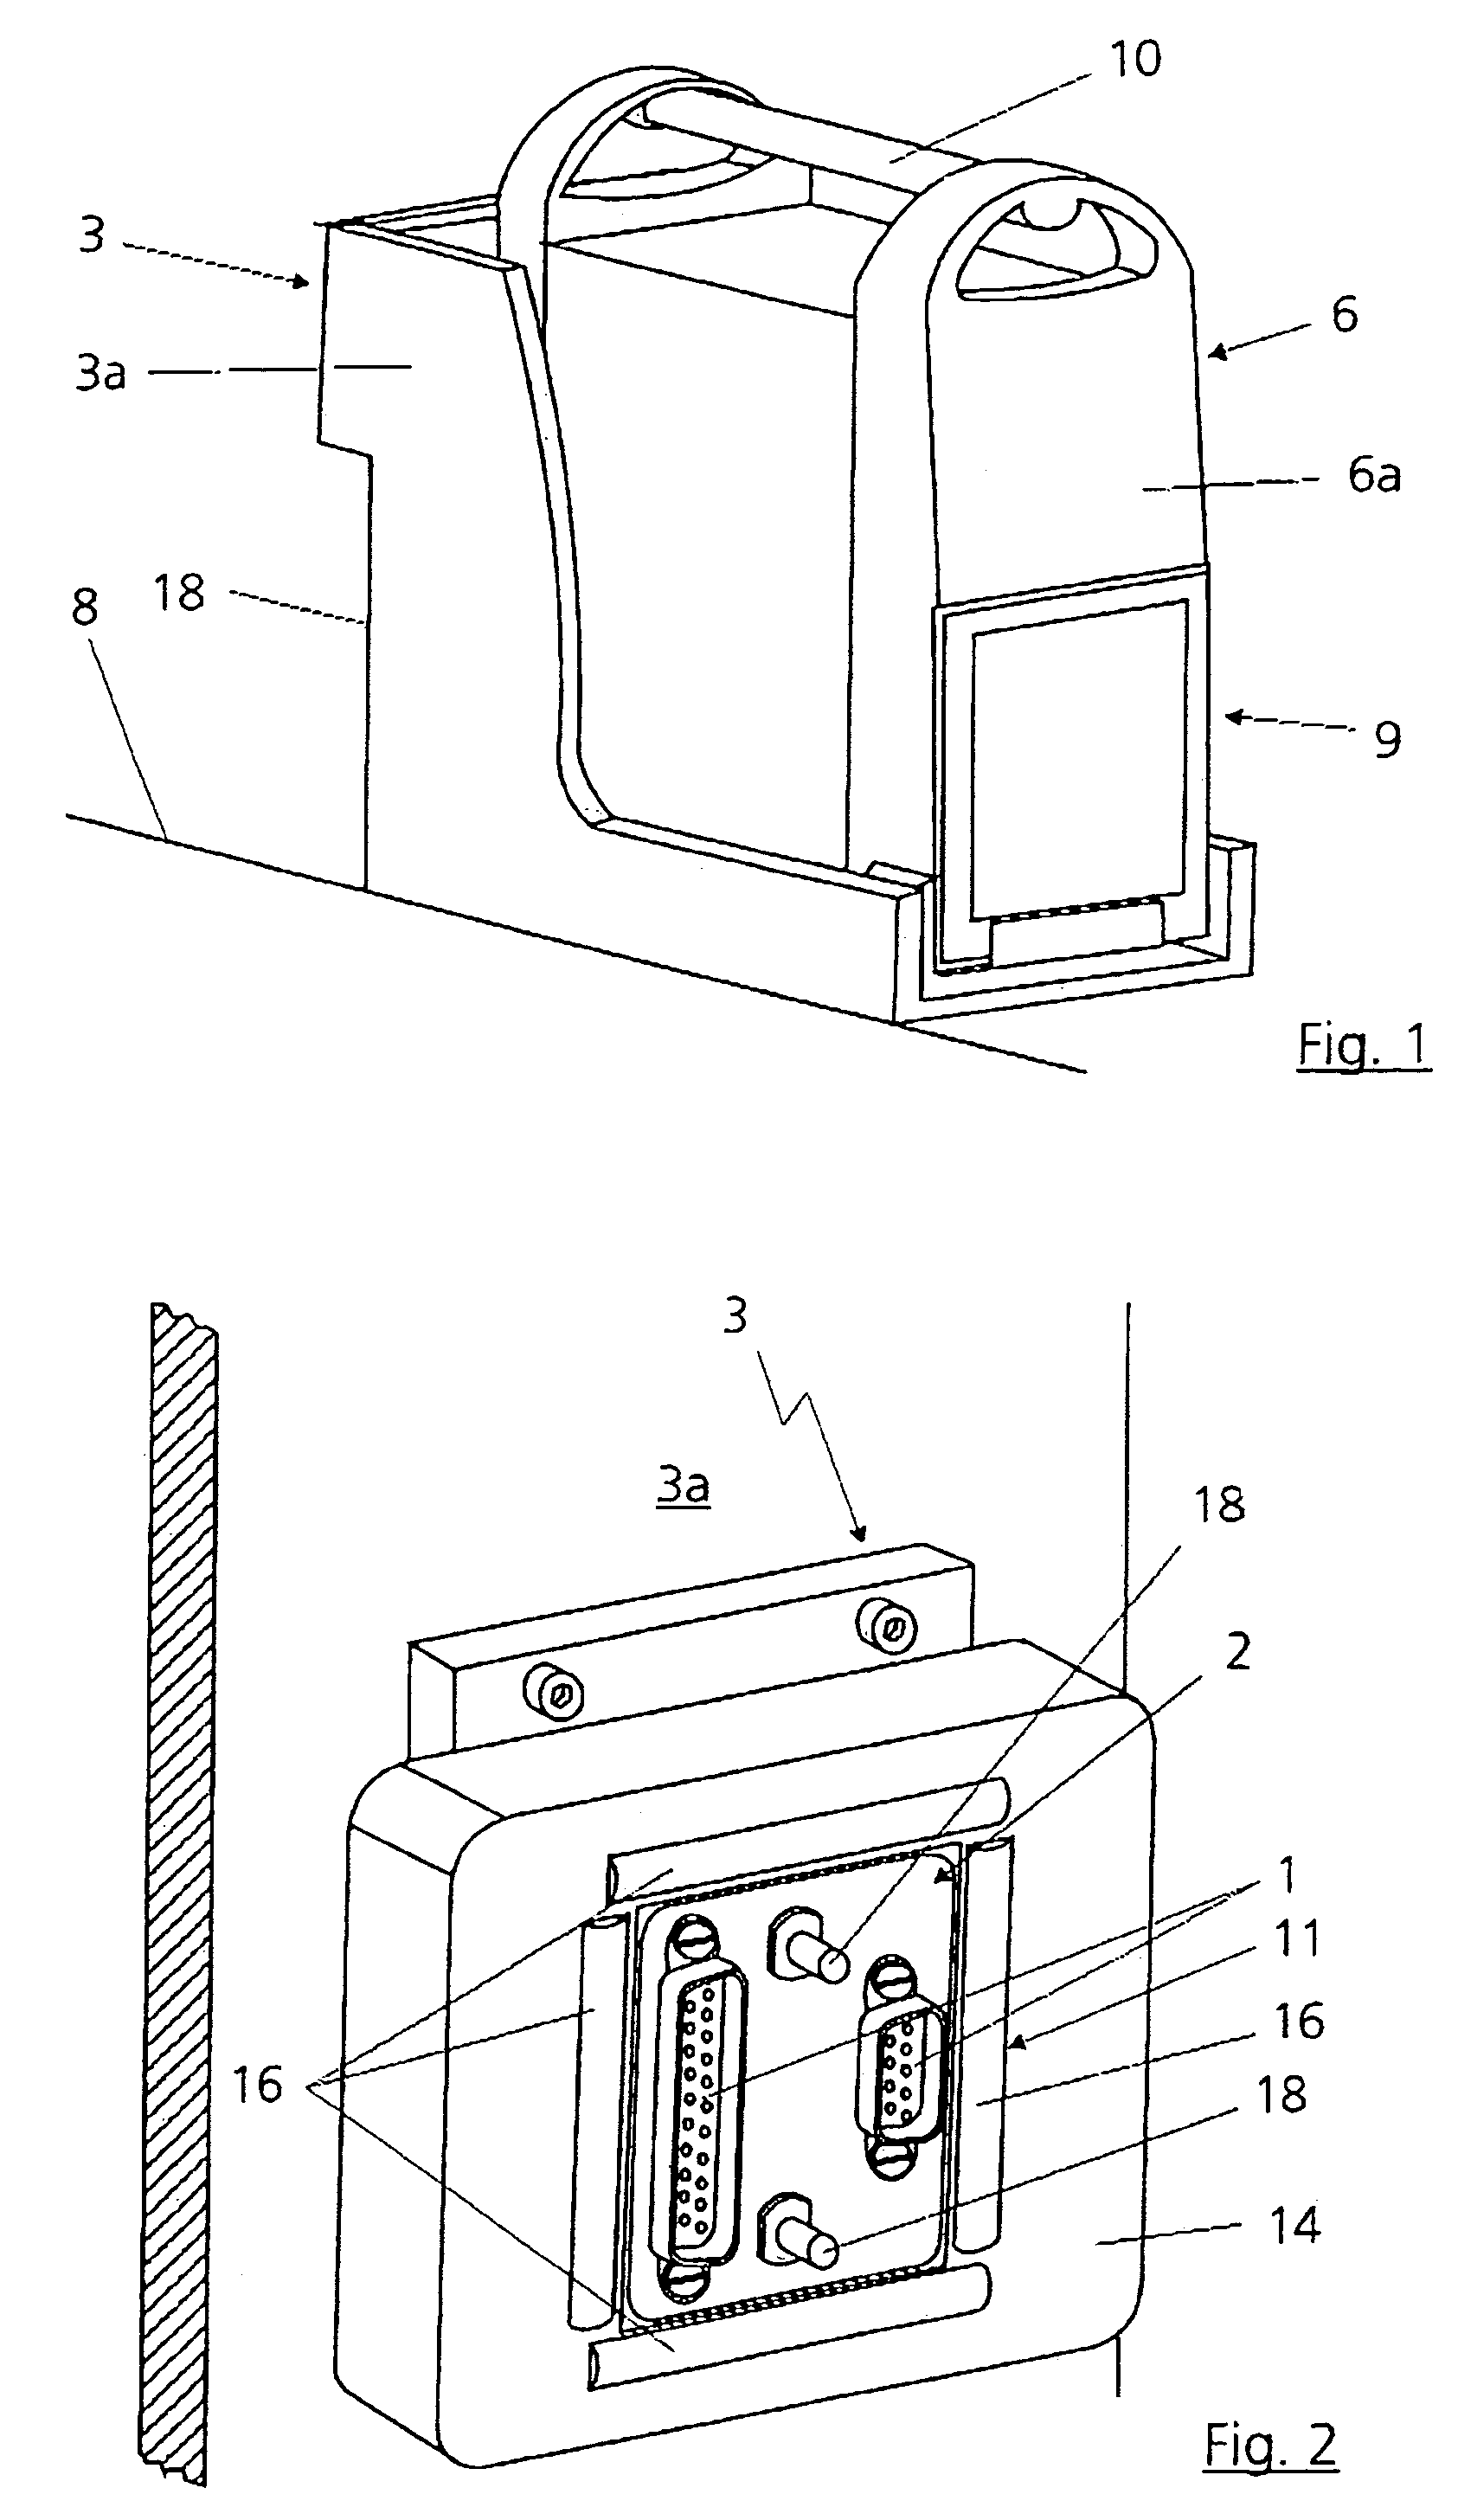 Apparatus for production of an electromagnetically shielded connection